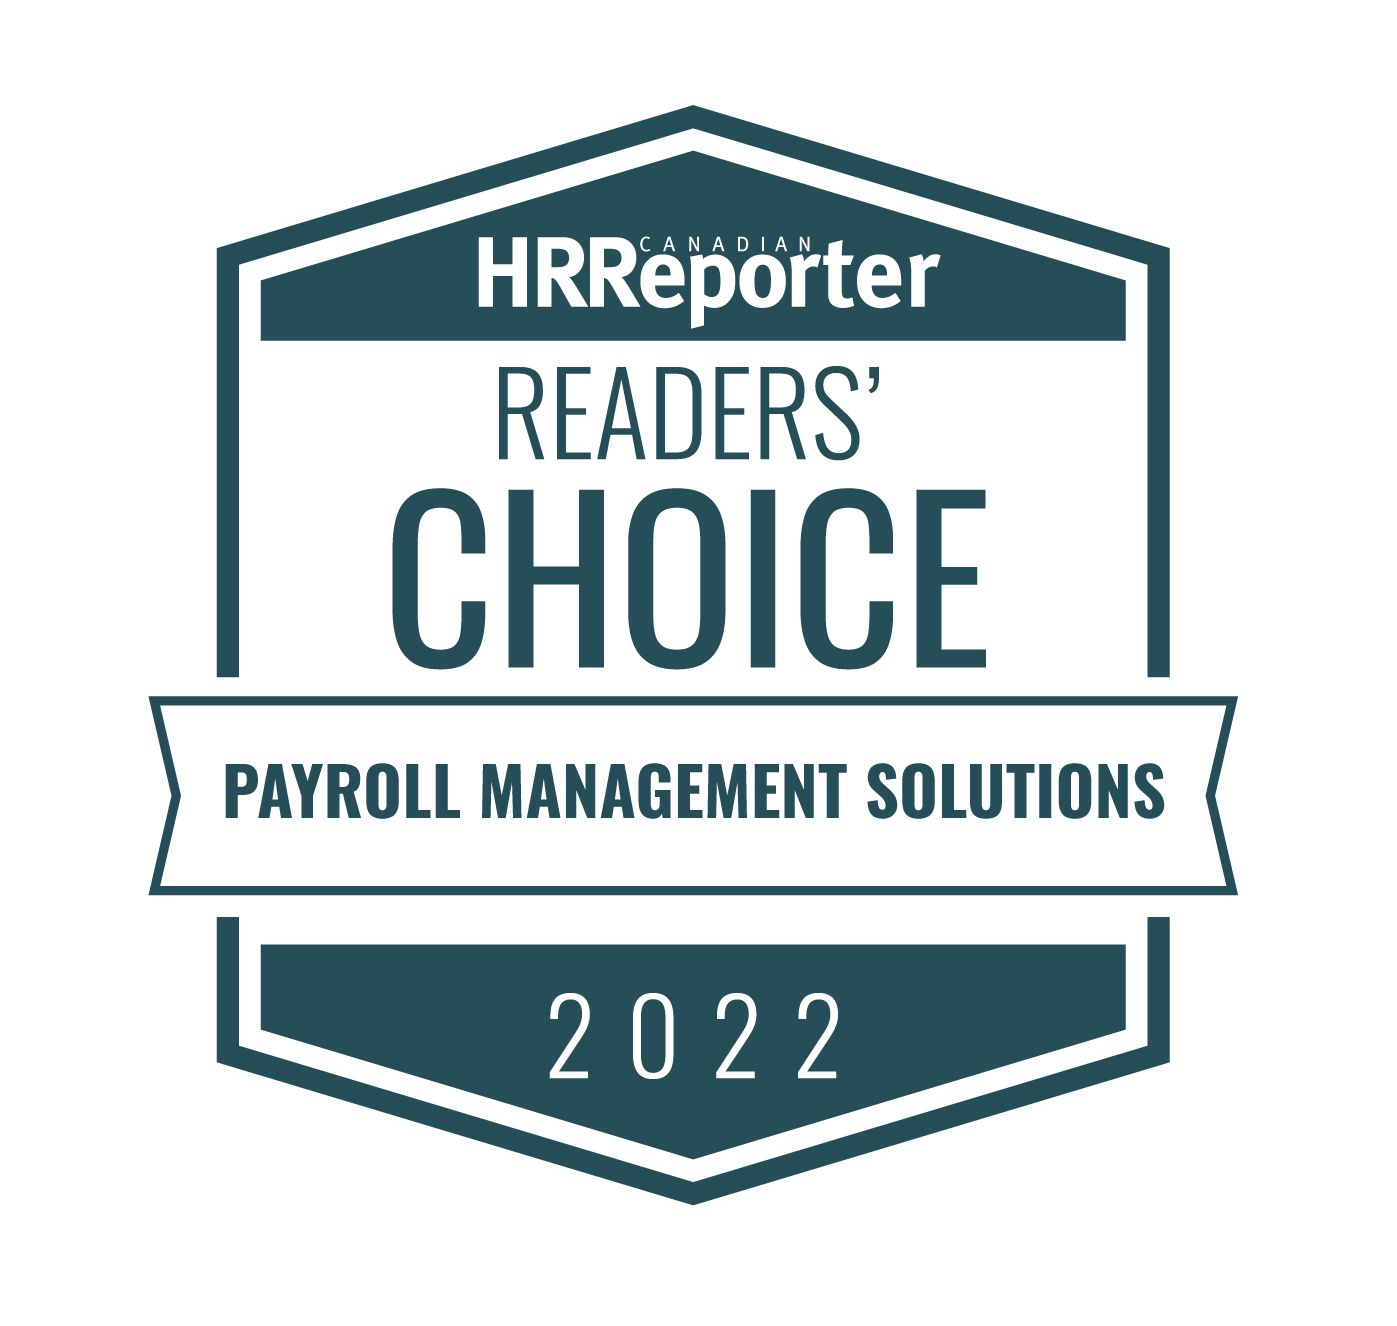 CHRR Readers Choice 2022 Payroll Management Solutions